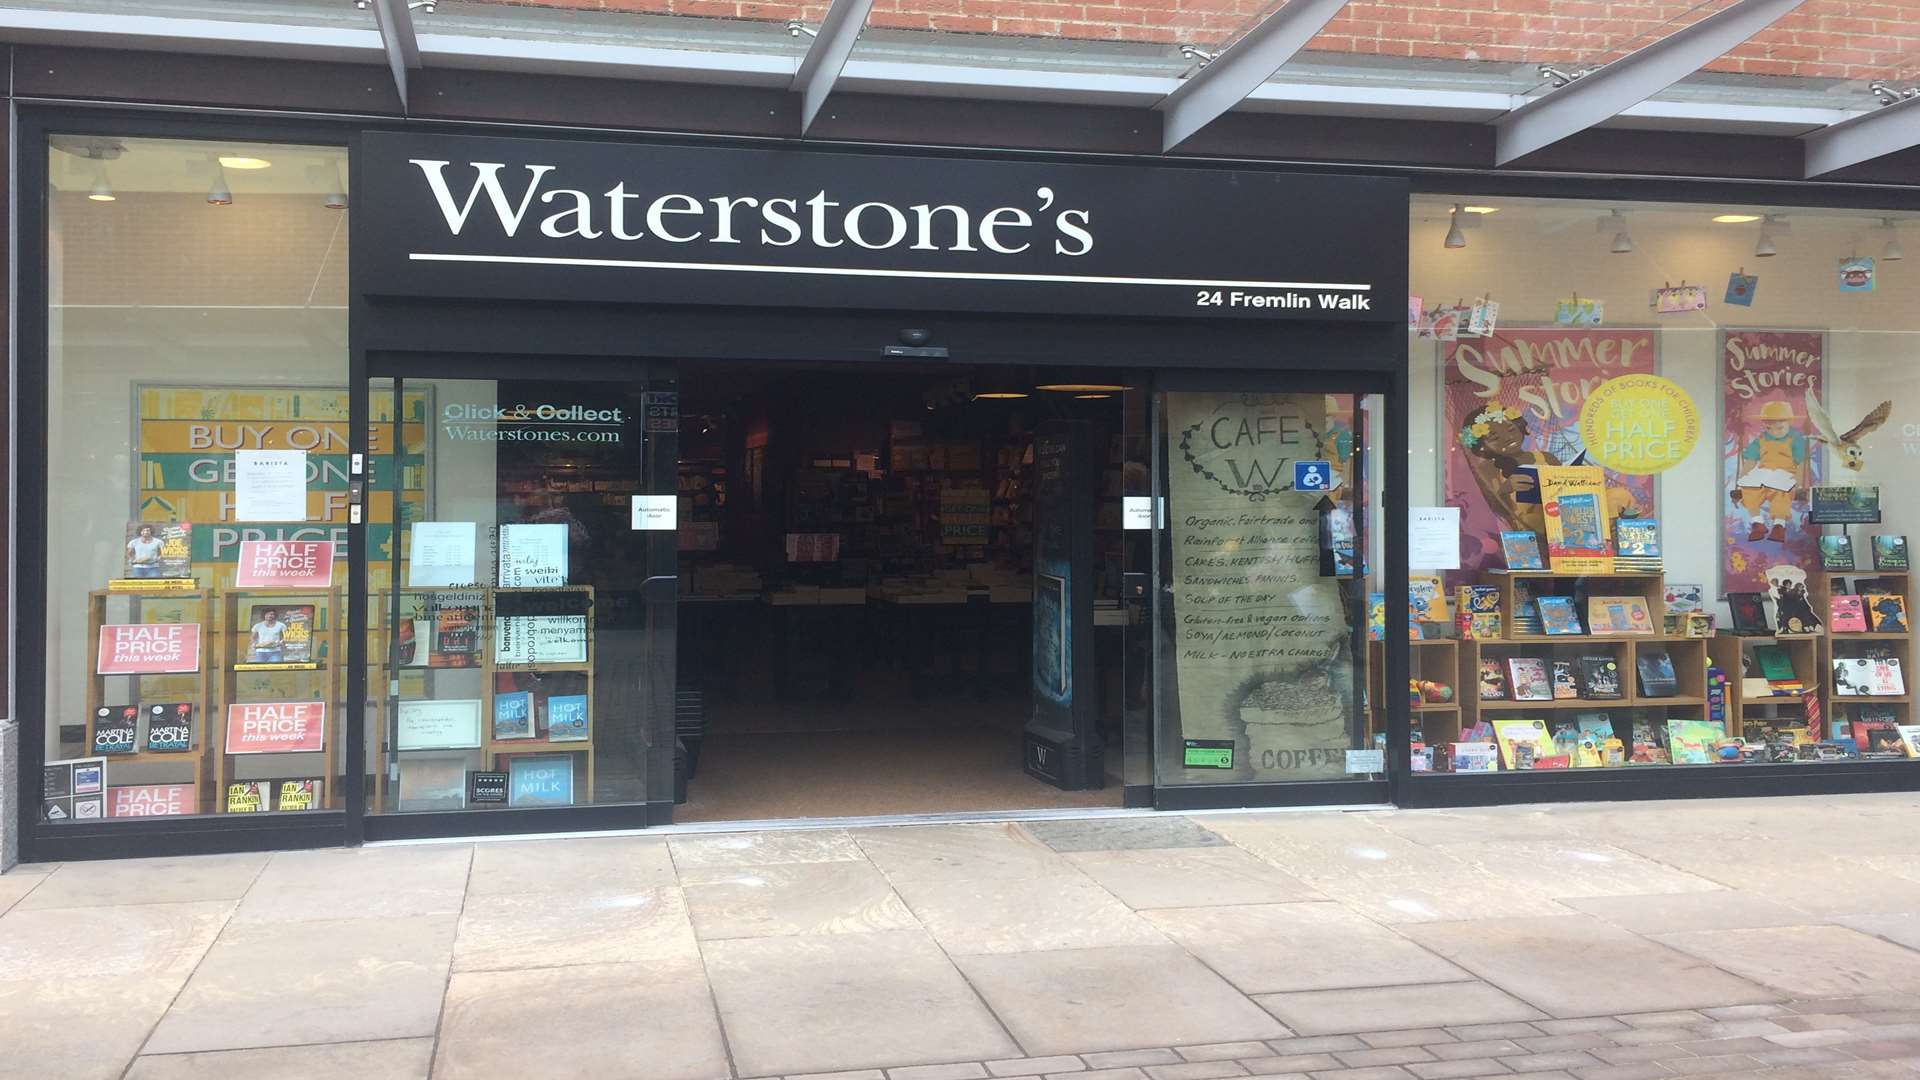 Waterstones has become the latest shop to be targeted by the toilet pervert